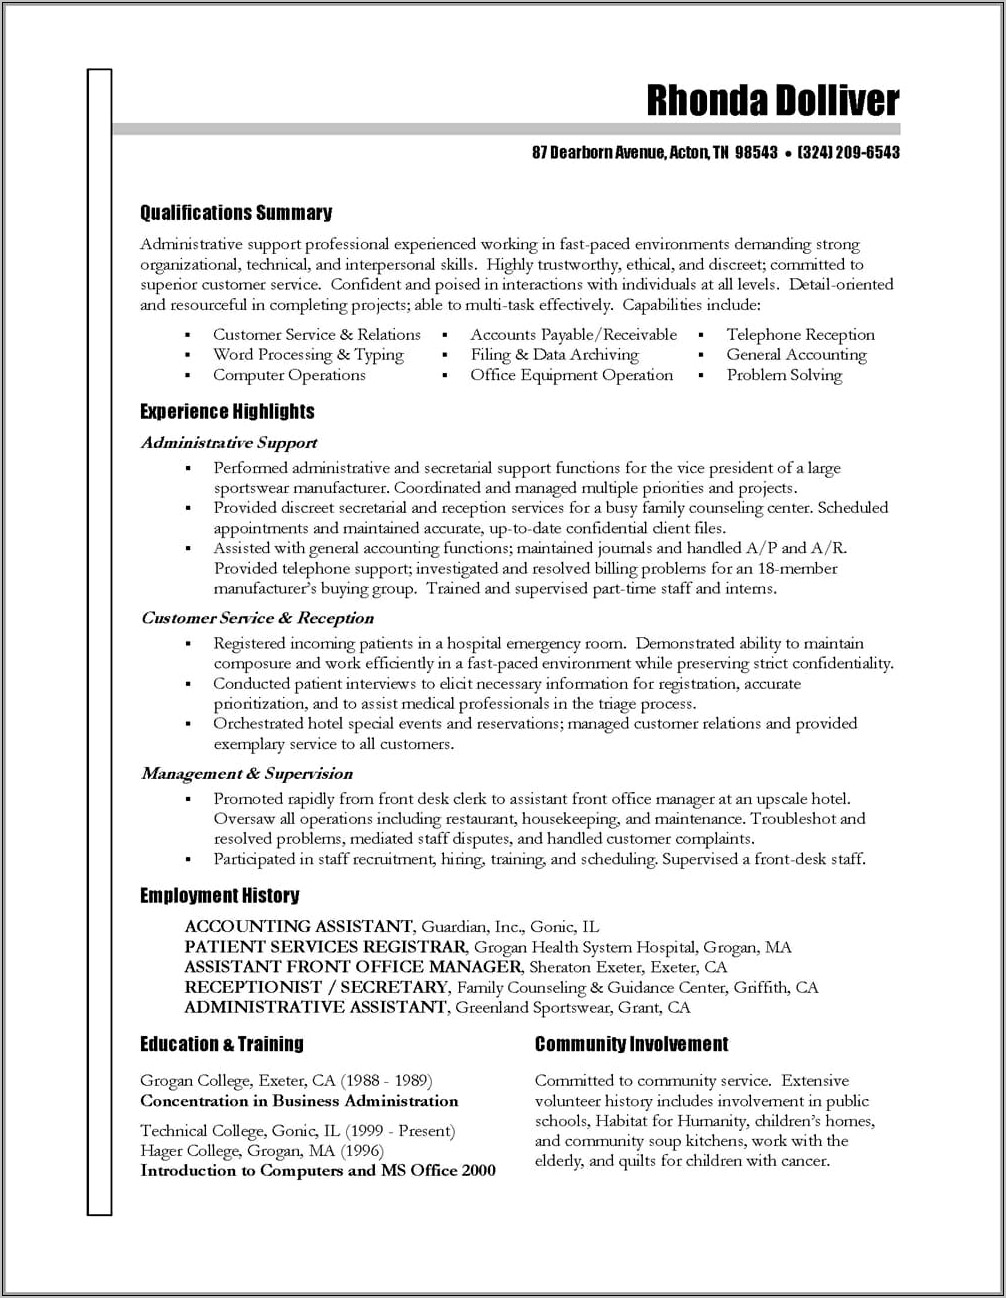 Sample Of Executive Administrative Assistant Resume